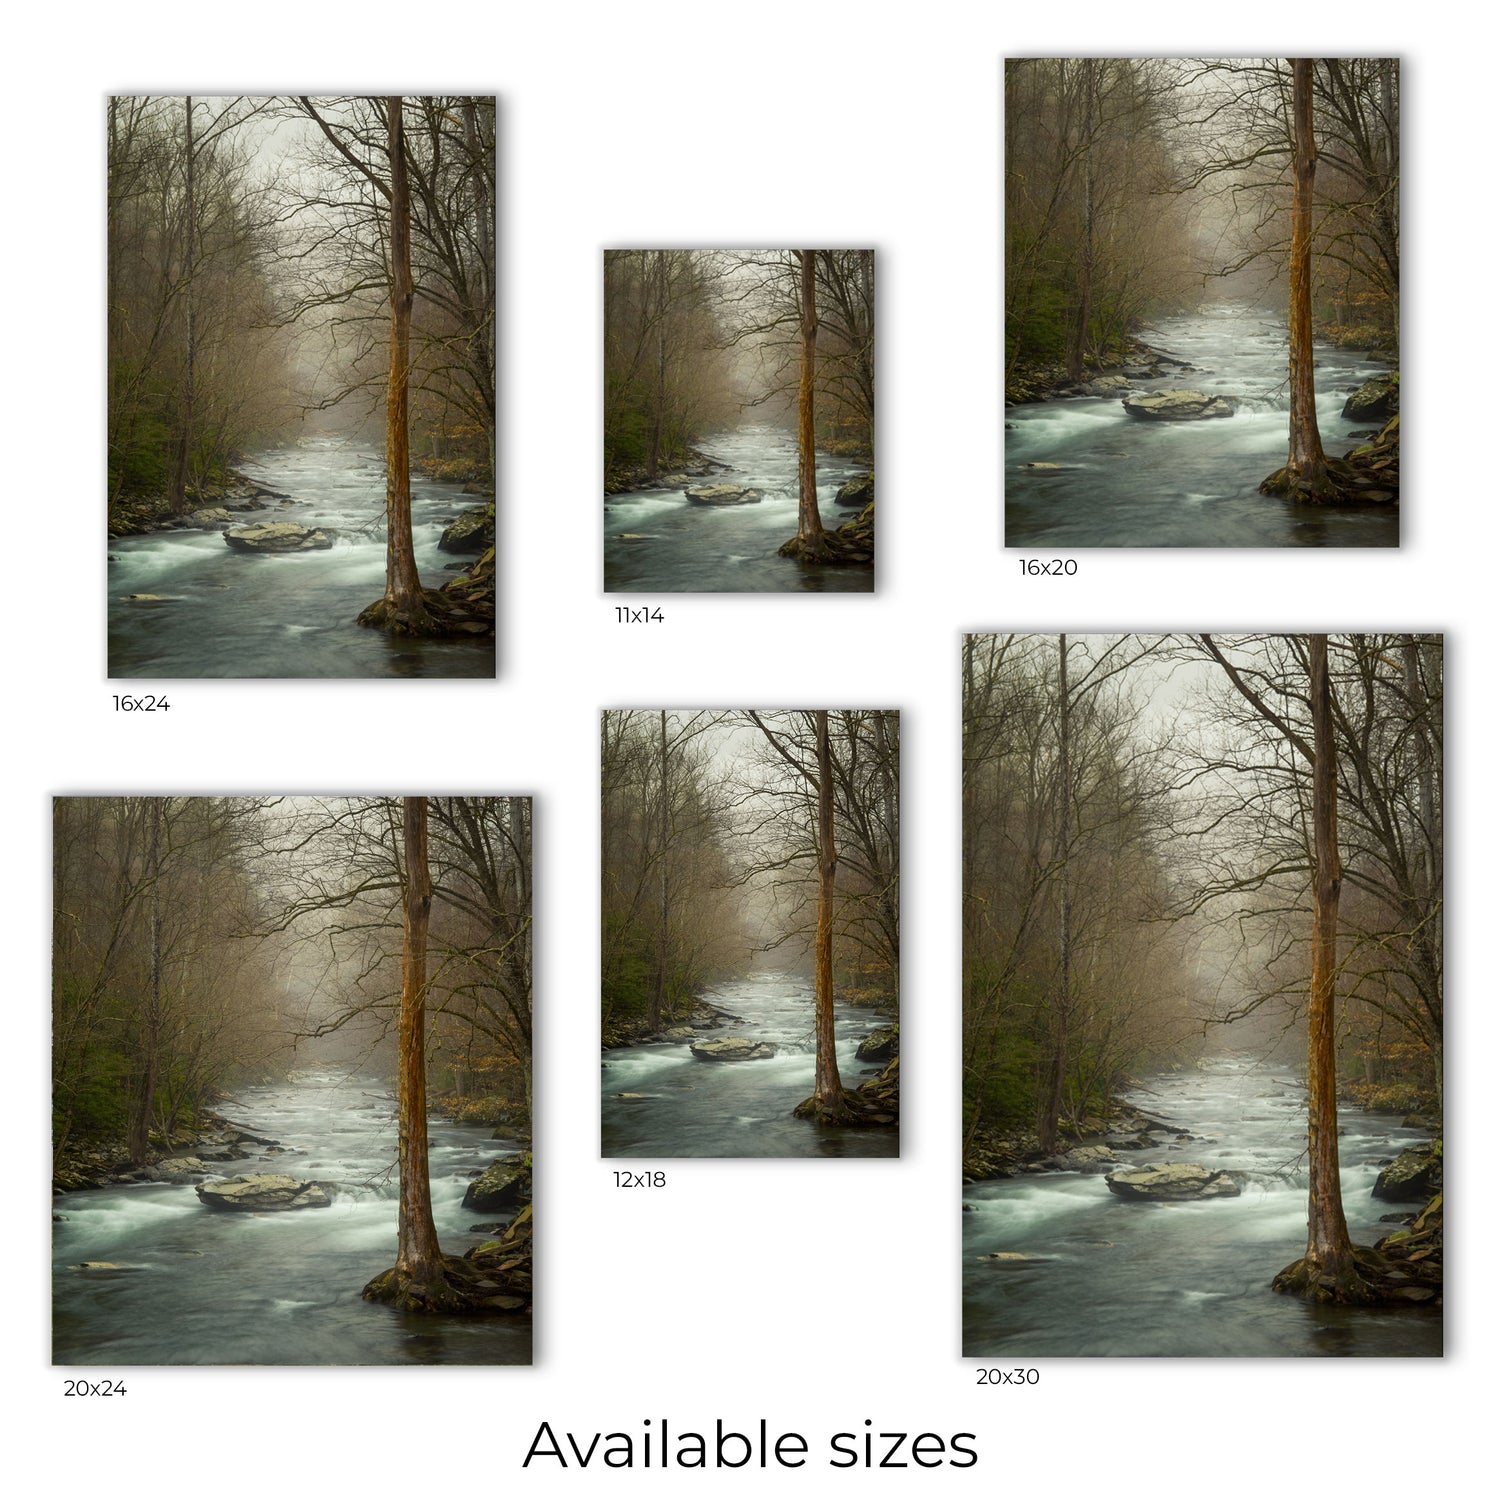 Experience the quiet solitude of the Great Smoky Mountains with this canvas wall art, showcasing the pristine Little River amidst a foggy forest landscape.